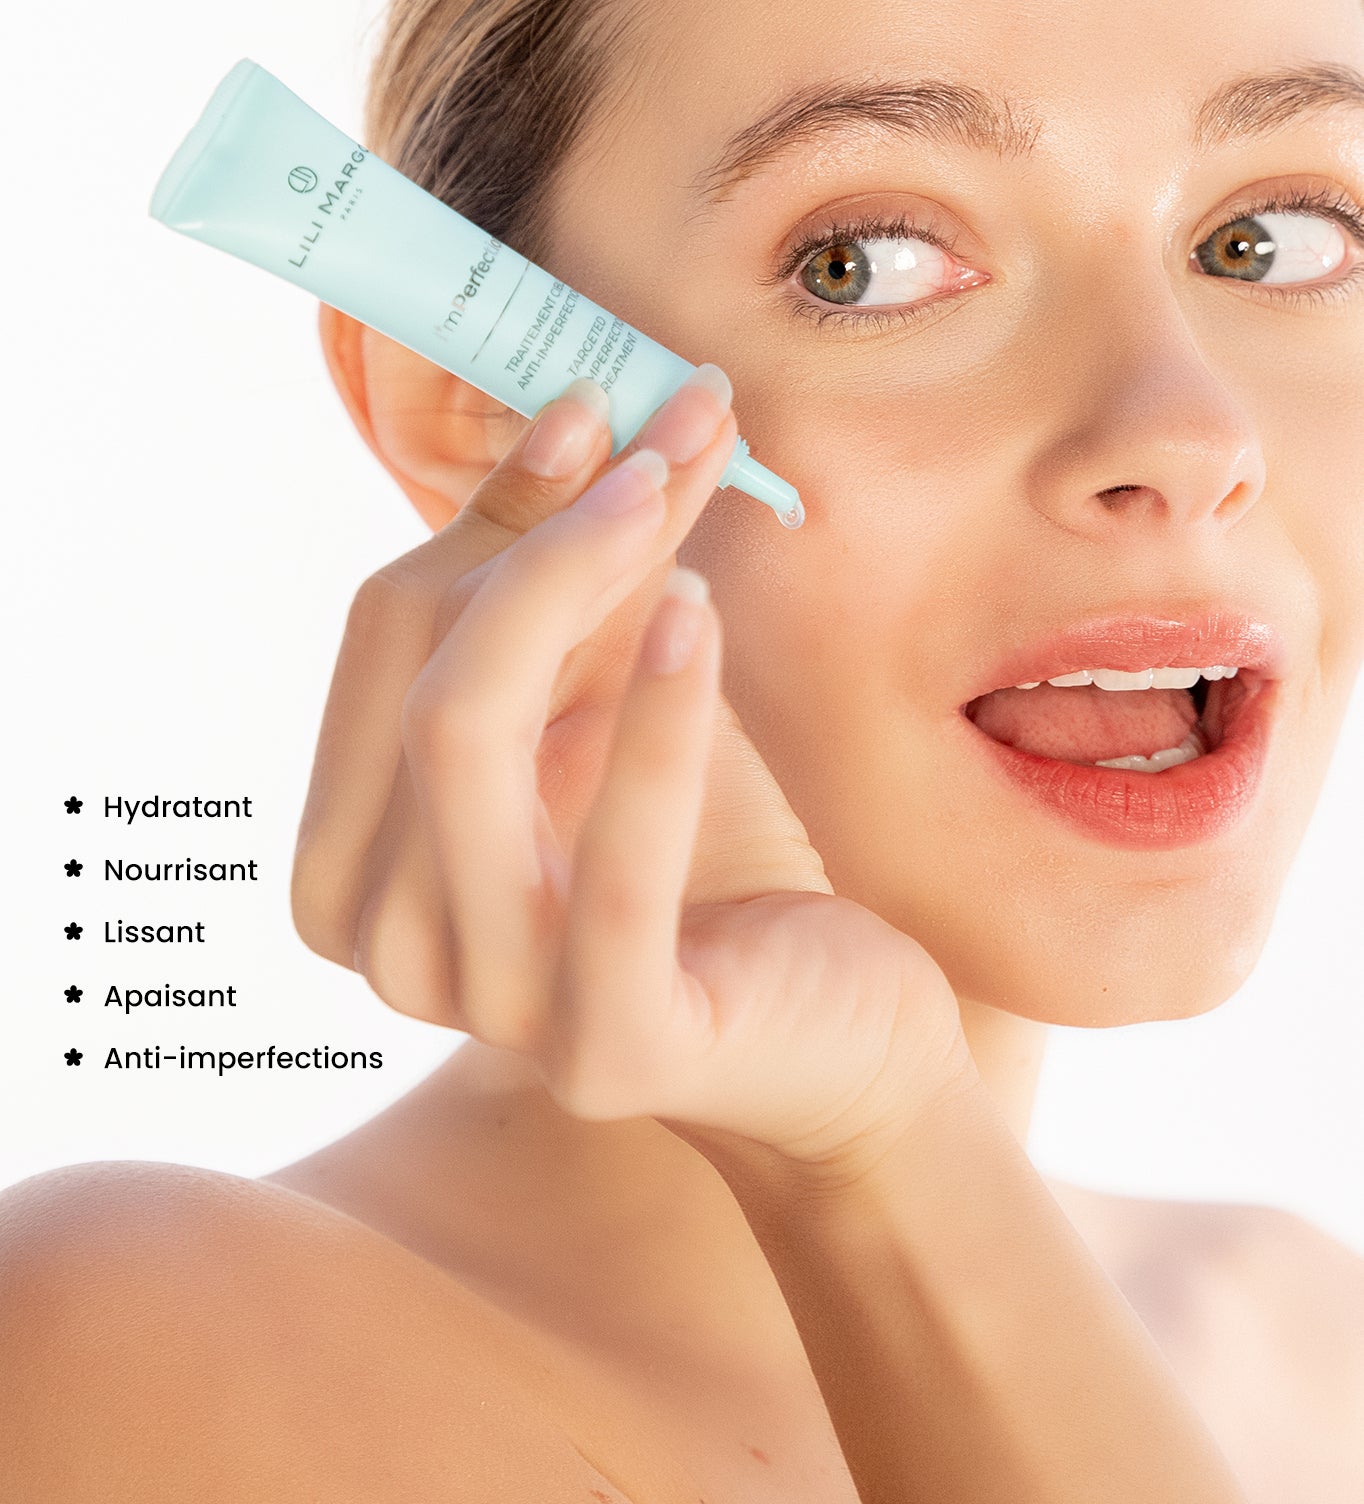 Targeted Anti-Imperfections Treatment